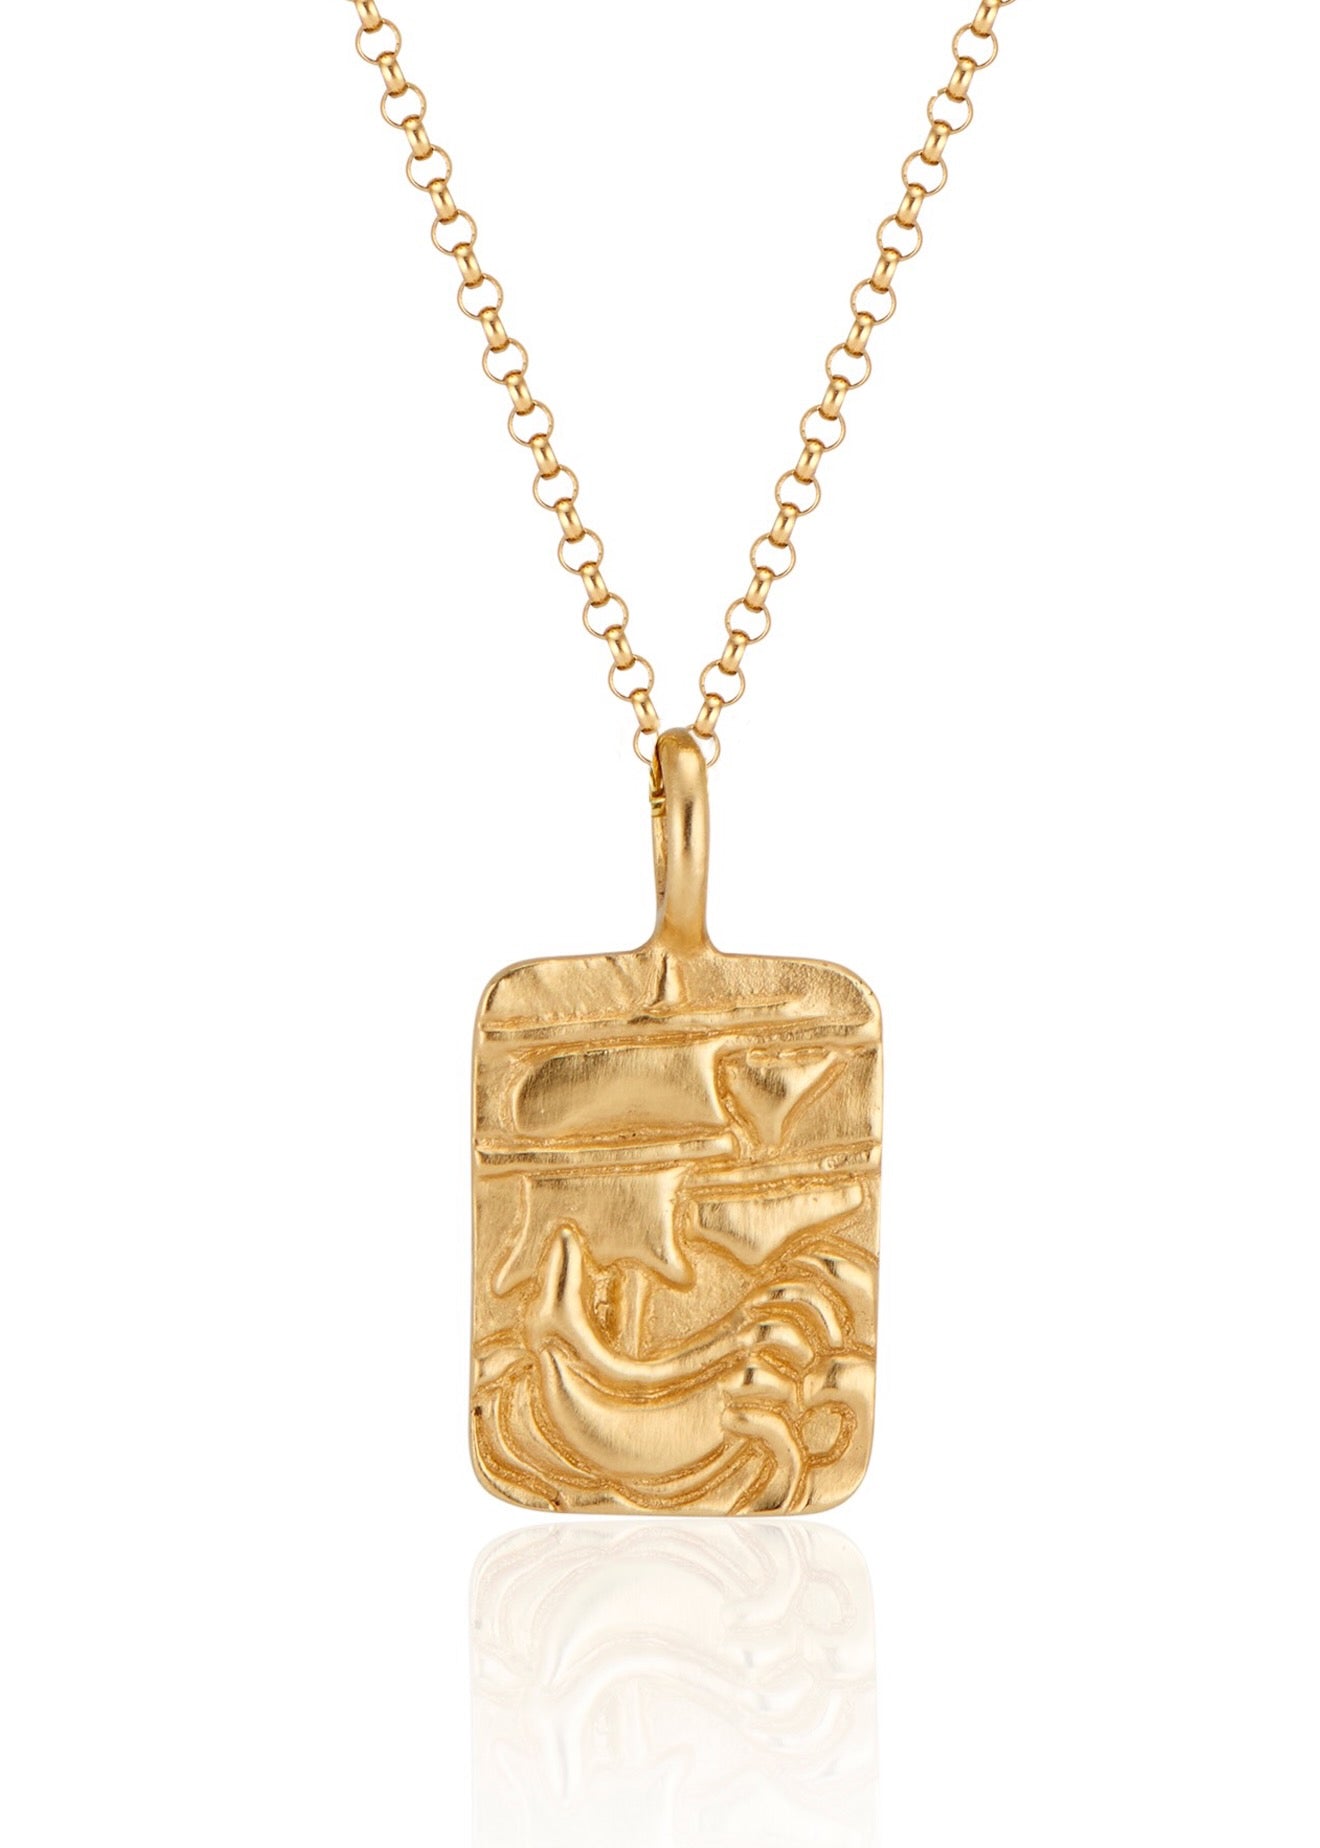 Arising from the swells of a stormy sea, the hand-carved ship of the Phantom necklace graces this substantial rectangular pendant— a timeless piece that echoes the mythic adventures of days past. 